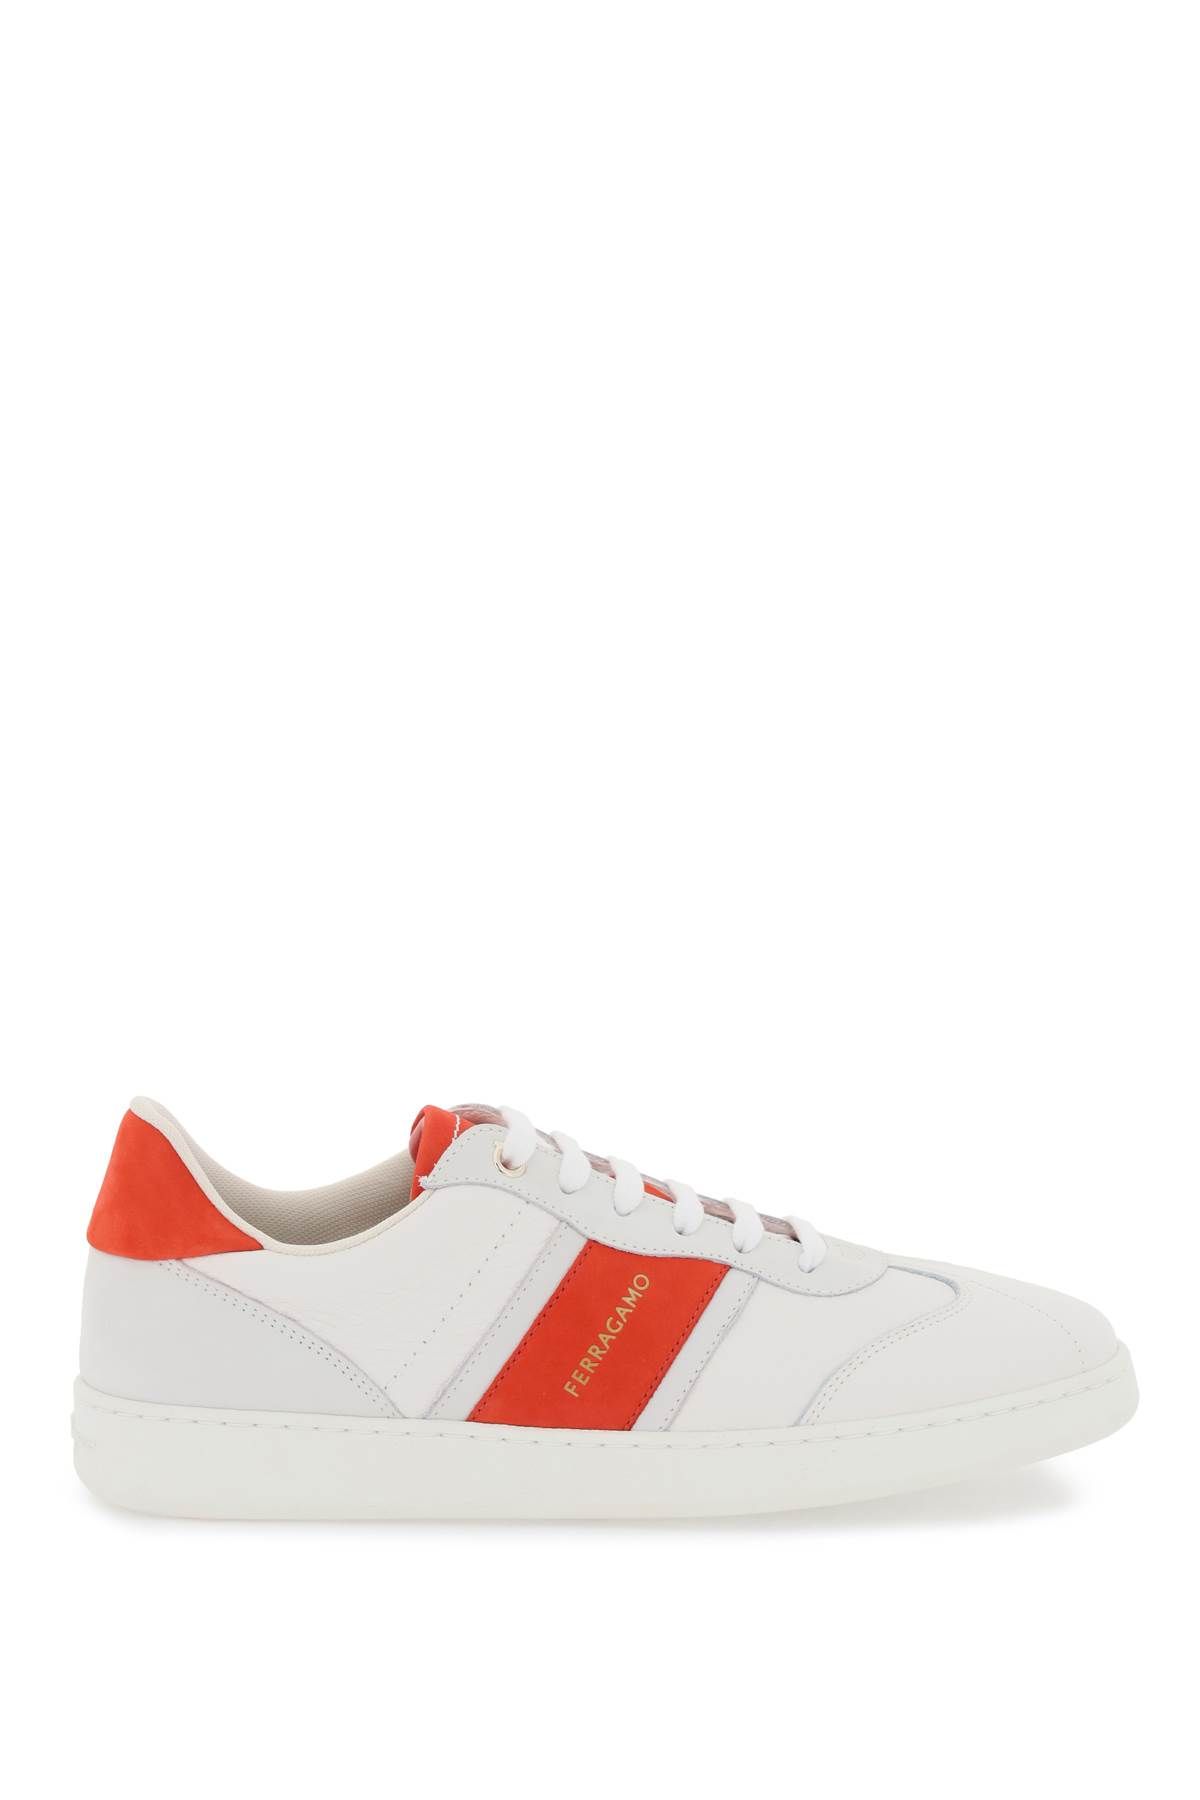 Shop Ferragamo Leather Sneakers In White,grey,red